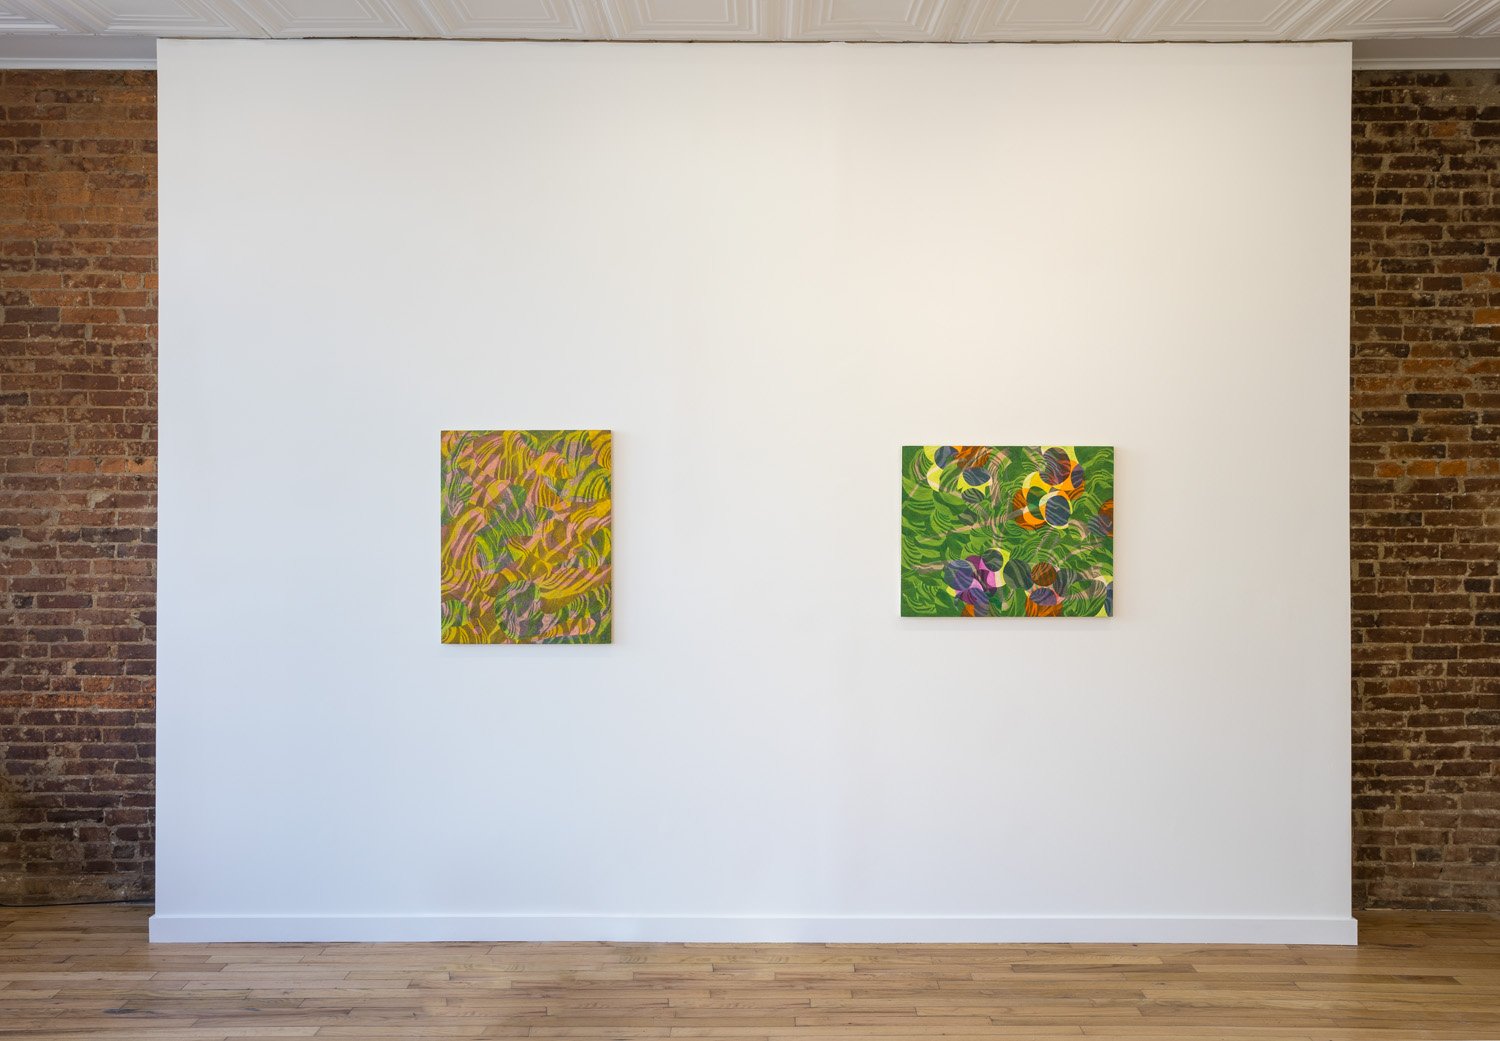   No Fixed Itinerary.  Installation view. Here Gallery, Pittsburgh 